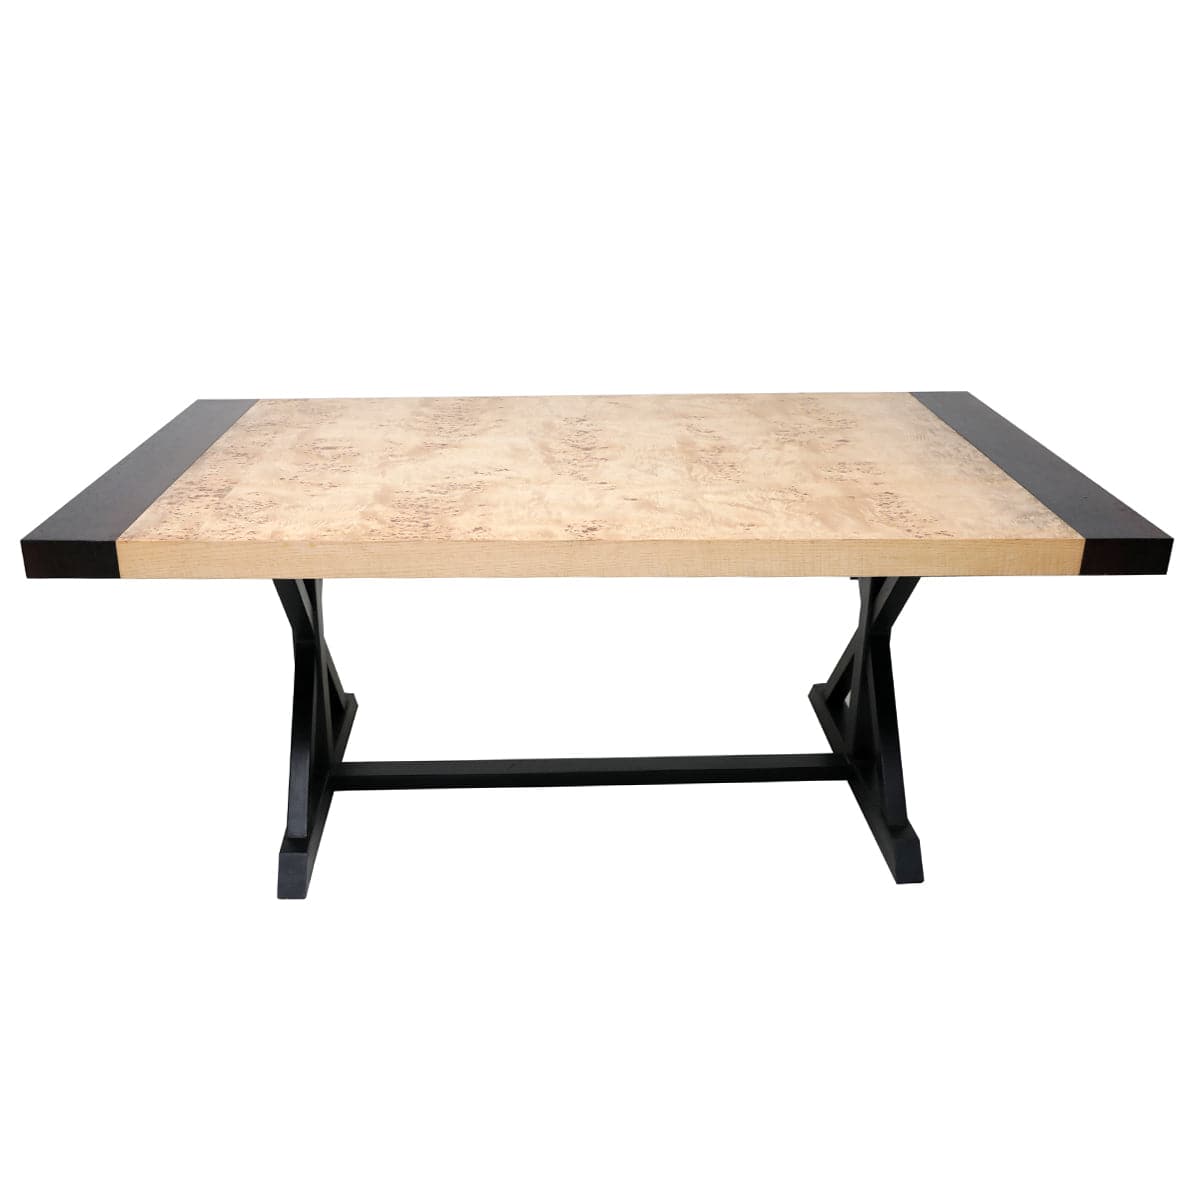 Harley dining 6 Person Dining Table